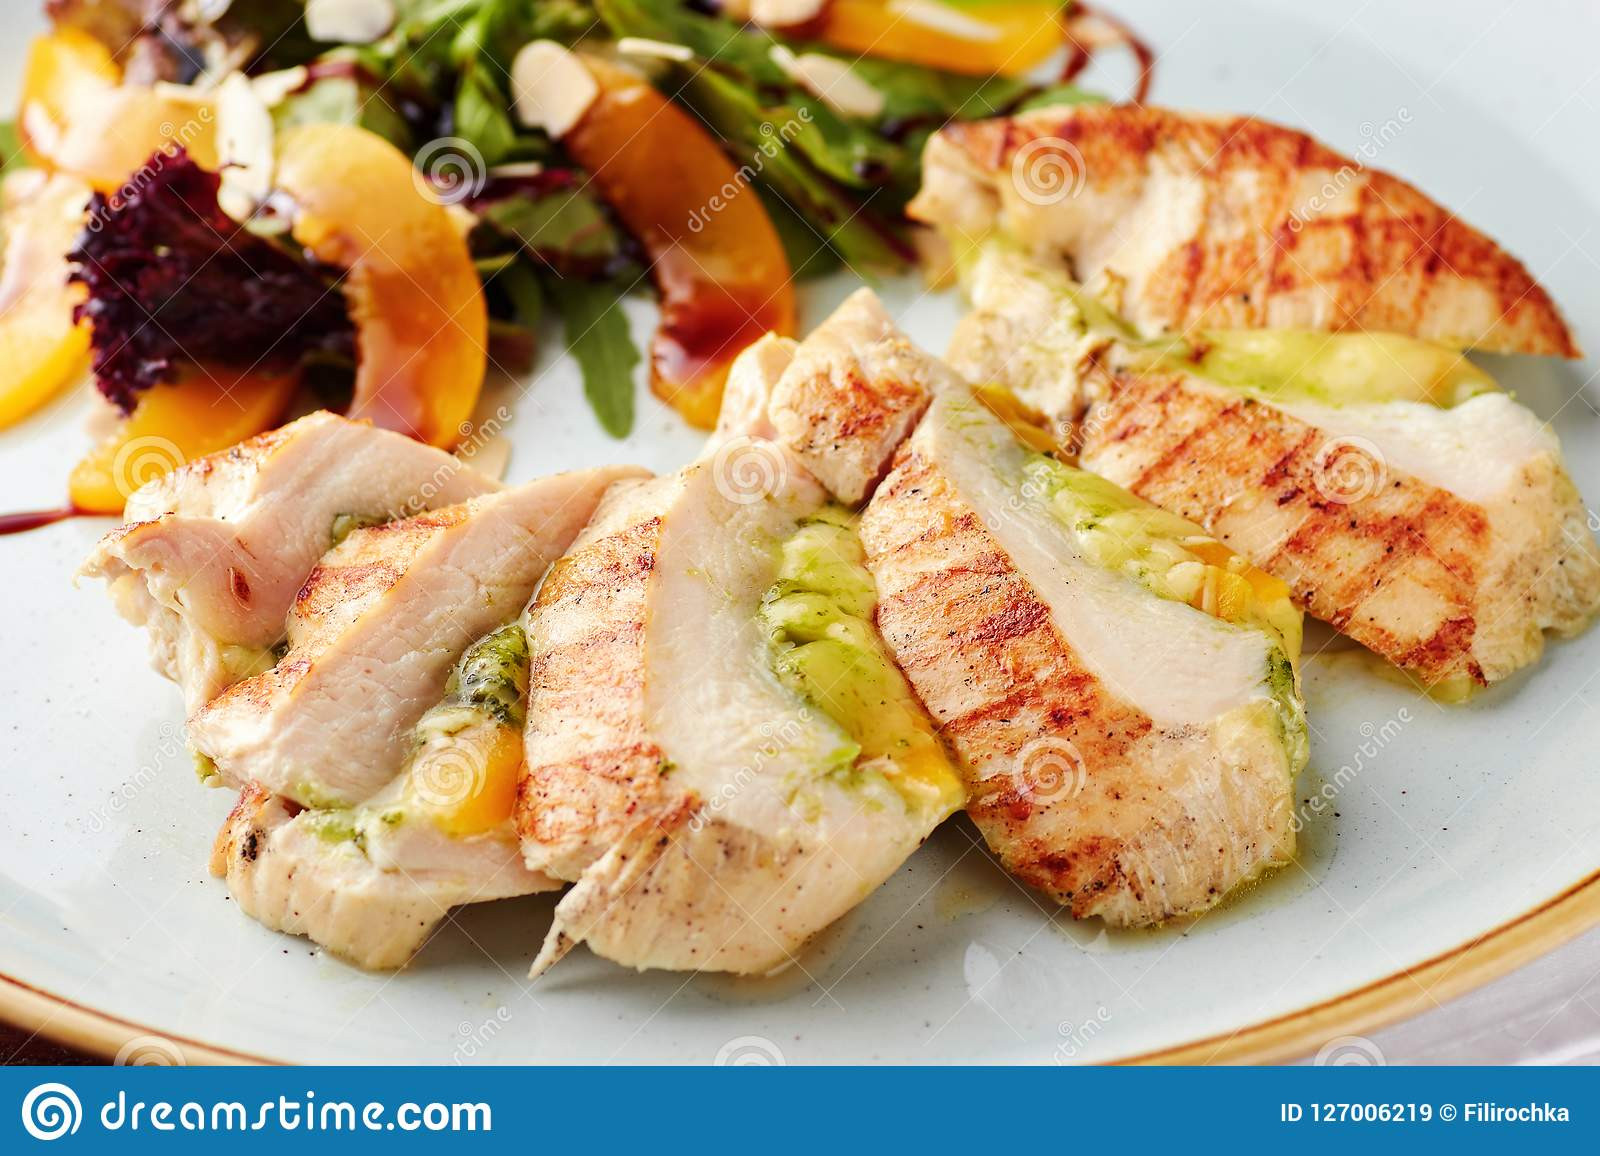 Chicken Breast Appetizers
 Stuffed Chicken Breast With Salad Stock Image Image of